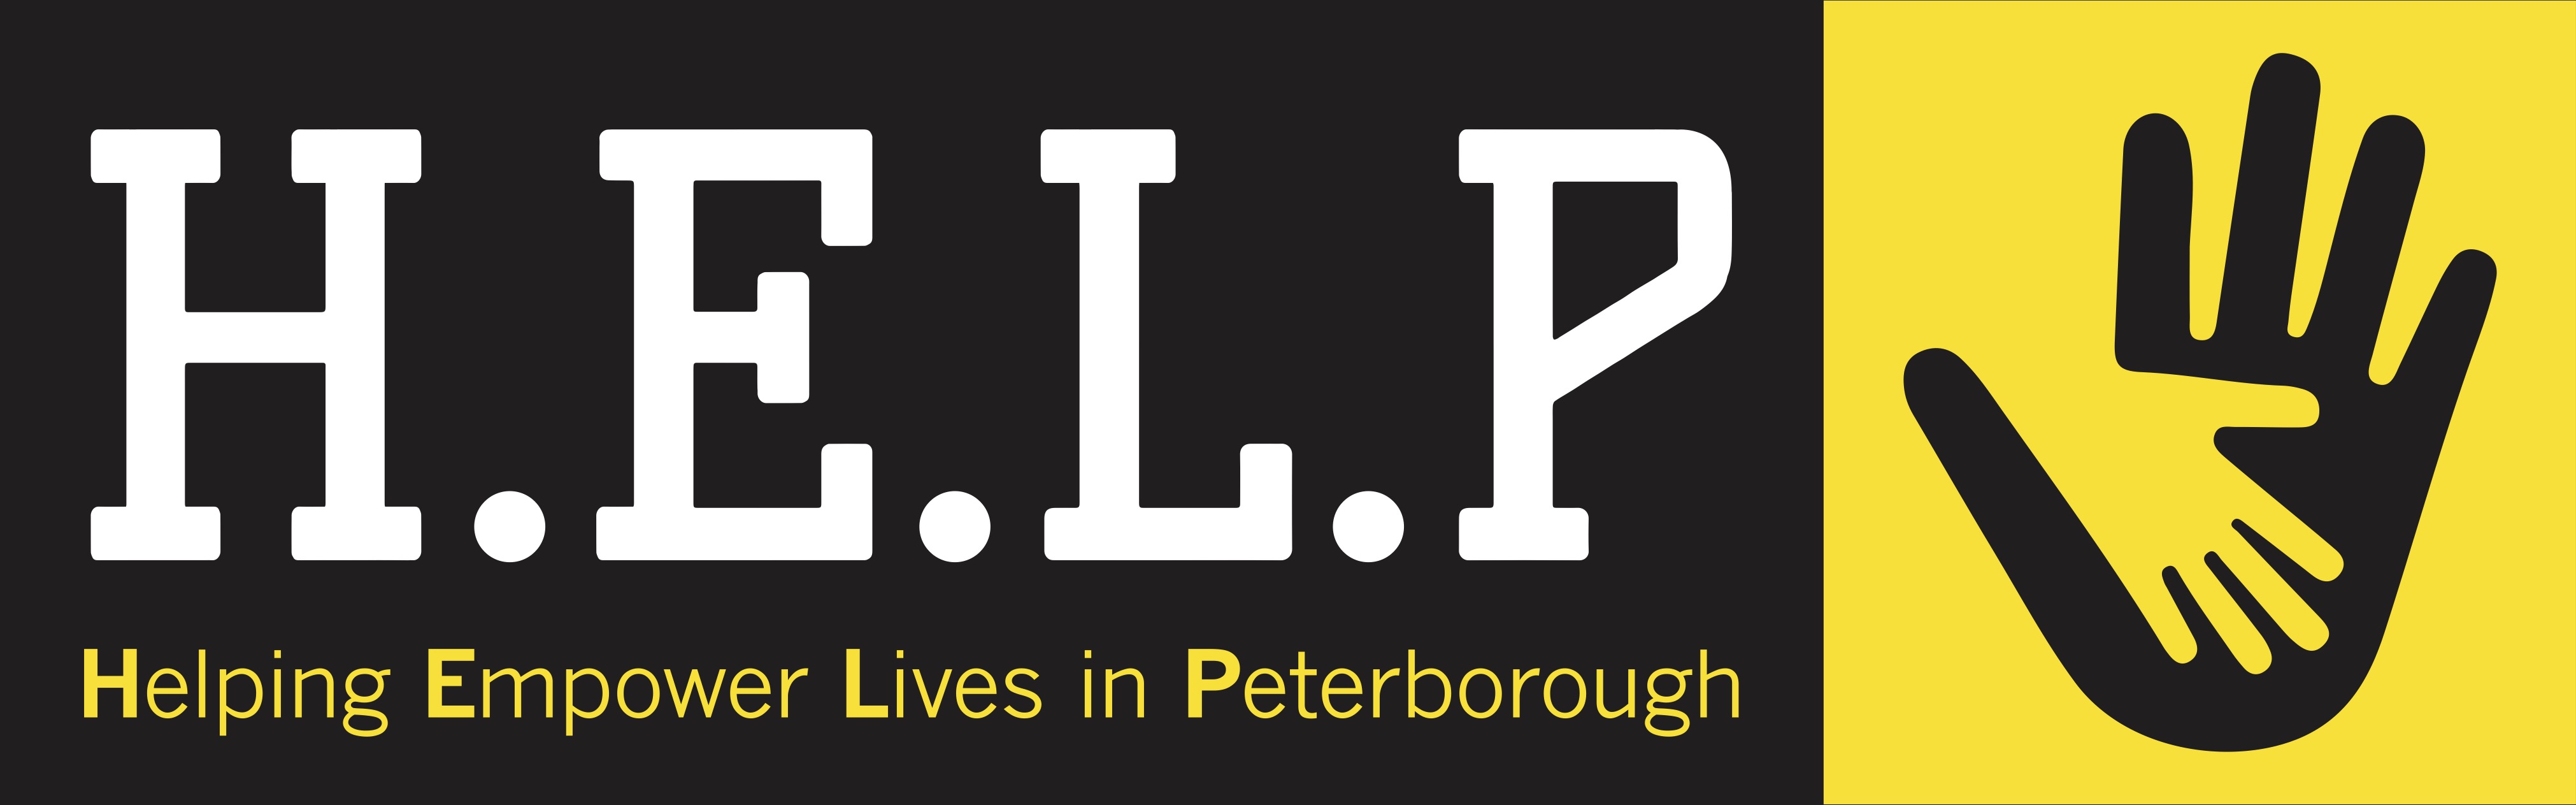 logo for H.E.L.P (Helping Empower Lives in Peterborough)